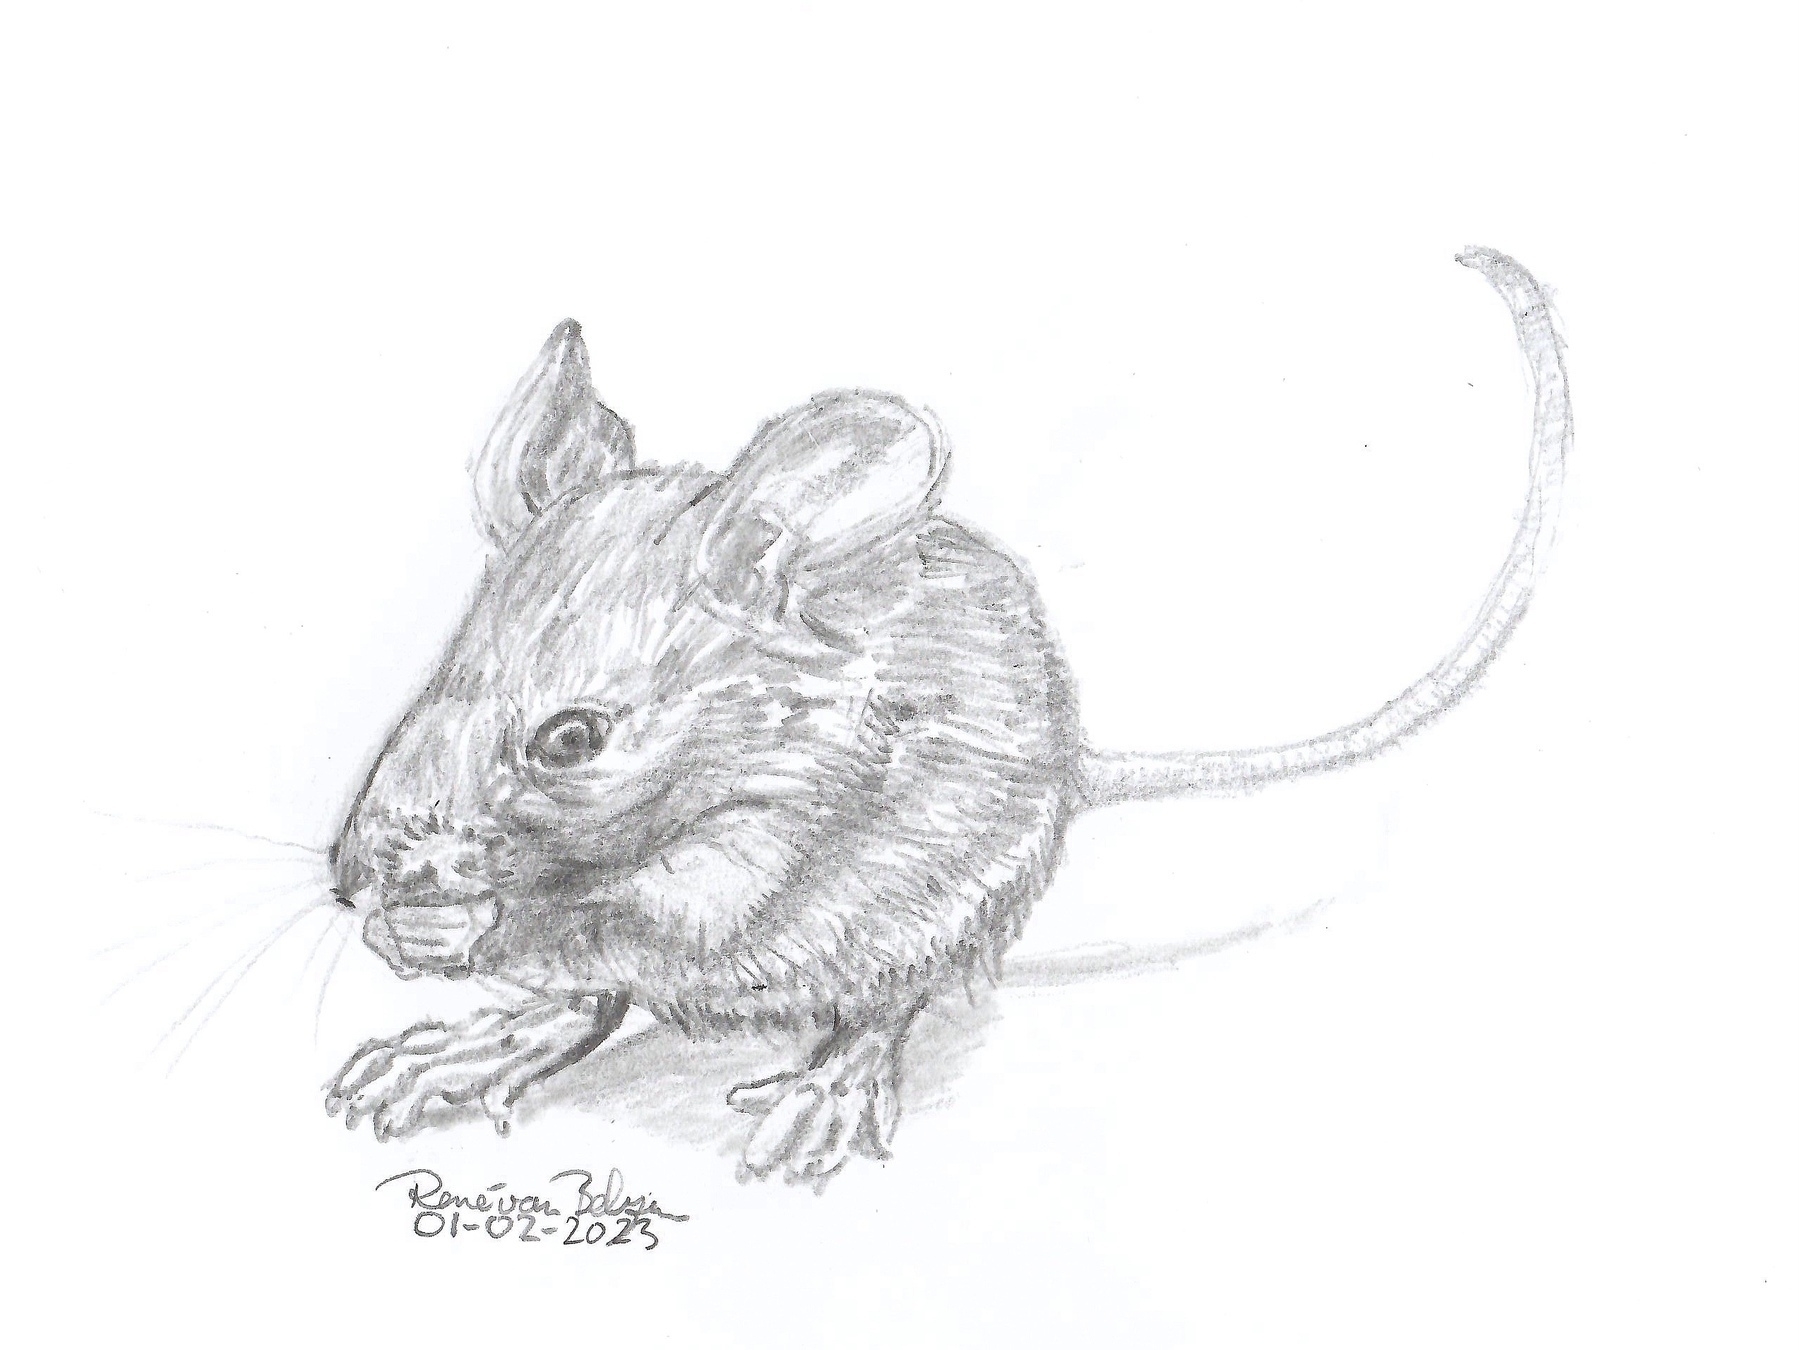 pencil sketch of a mouse